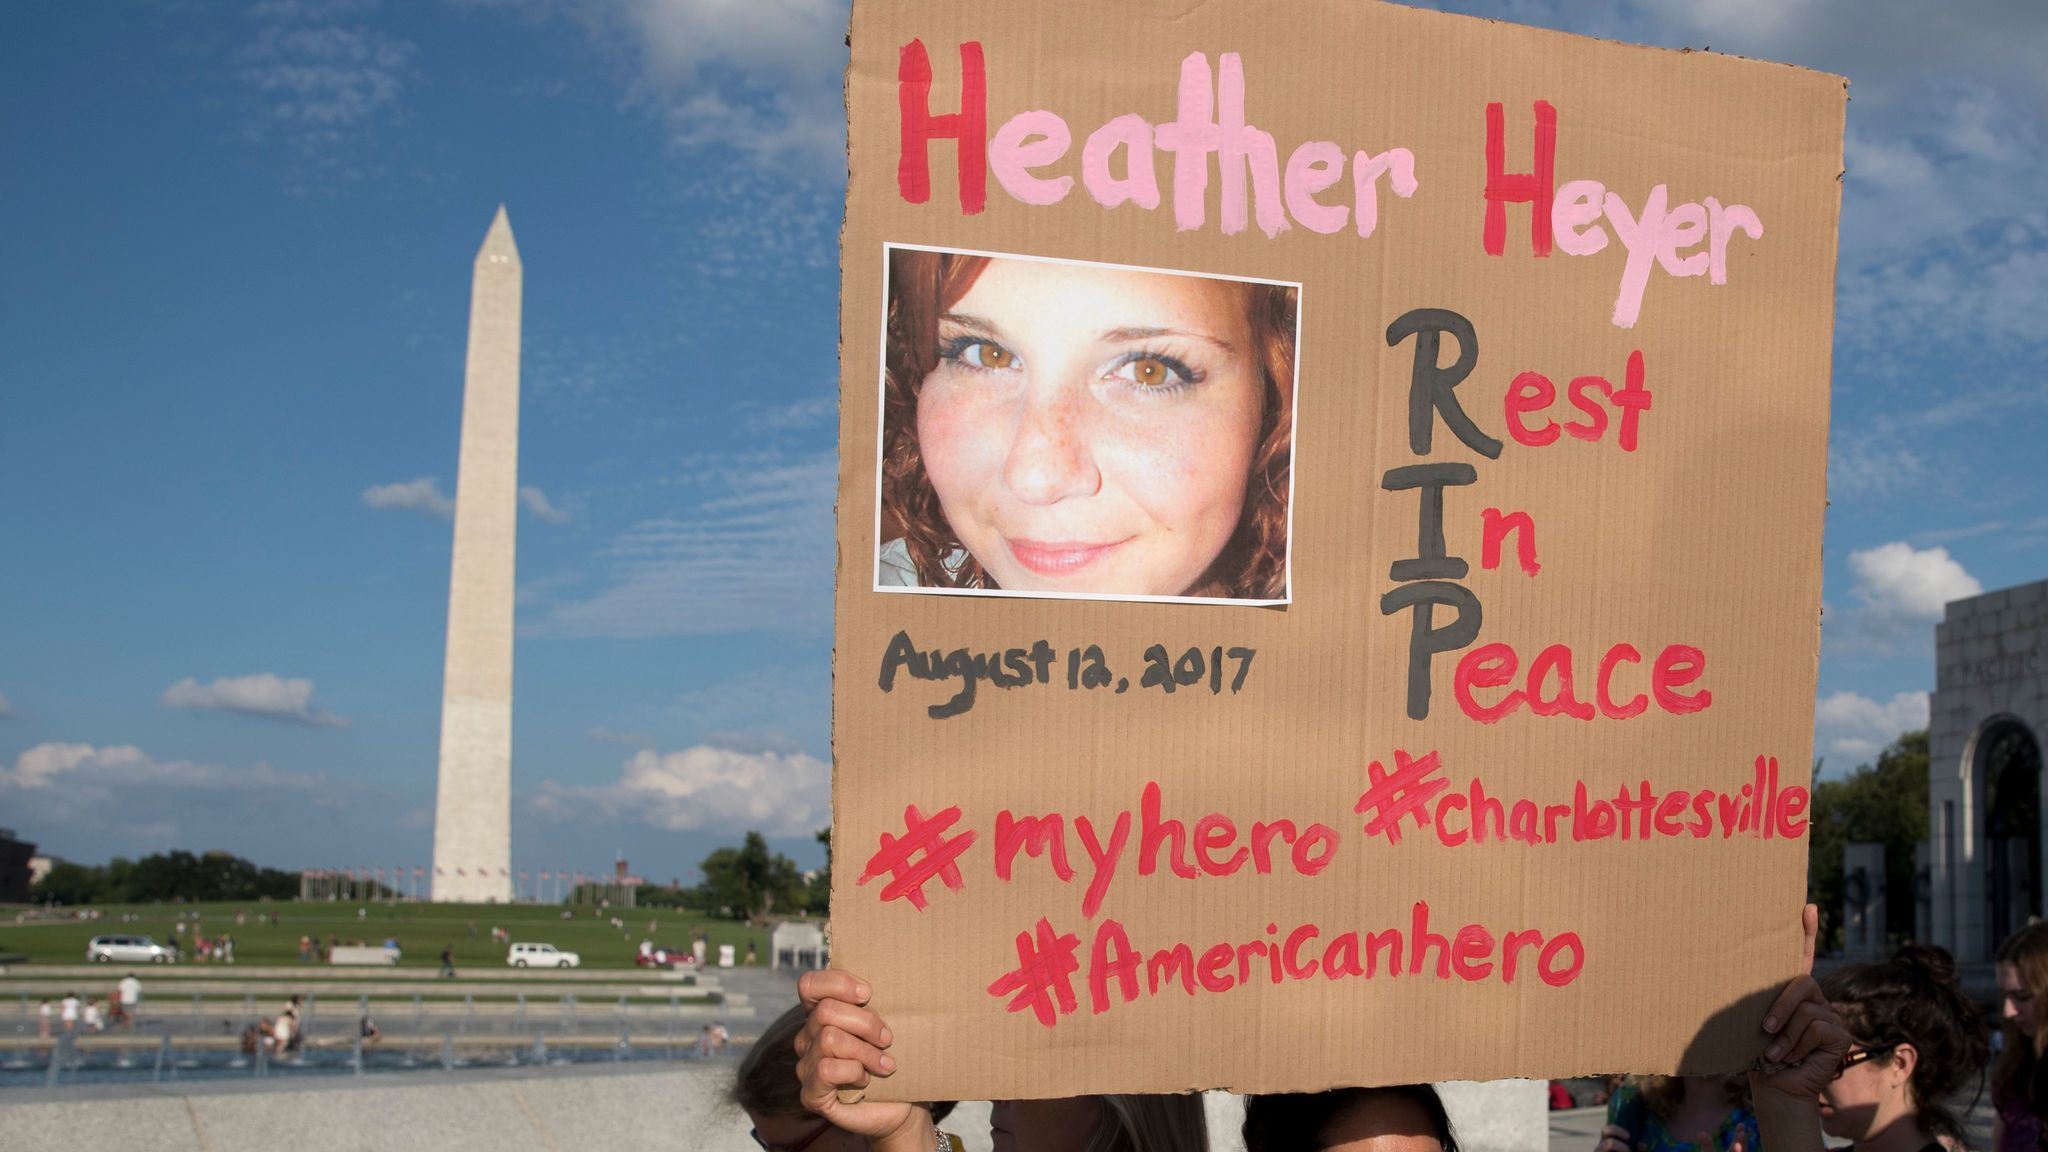 A woman holds a sign honoring Heather Heyer, a victim of this weekend's violence in Charlottesville, Va.,